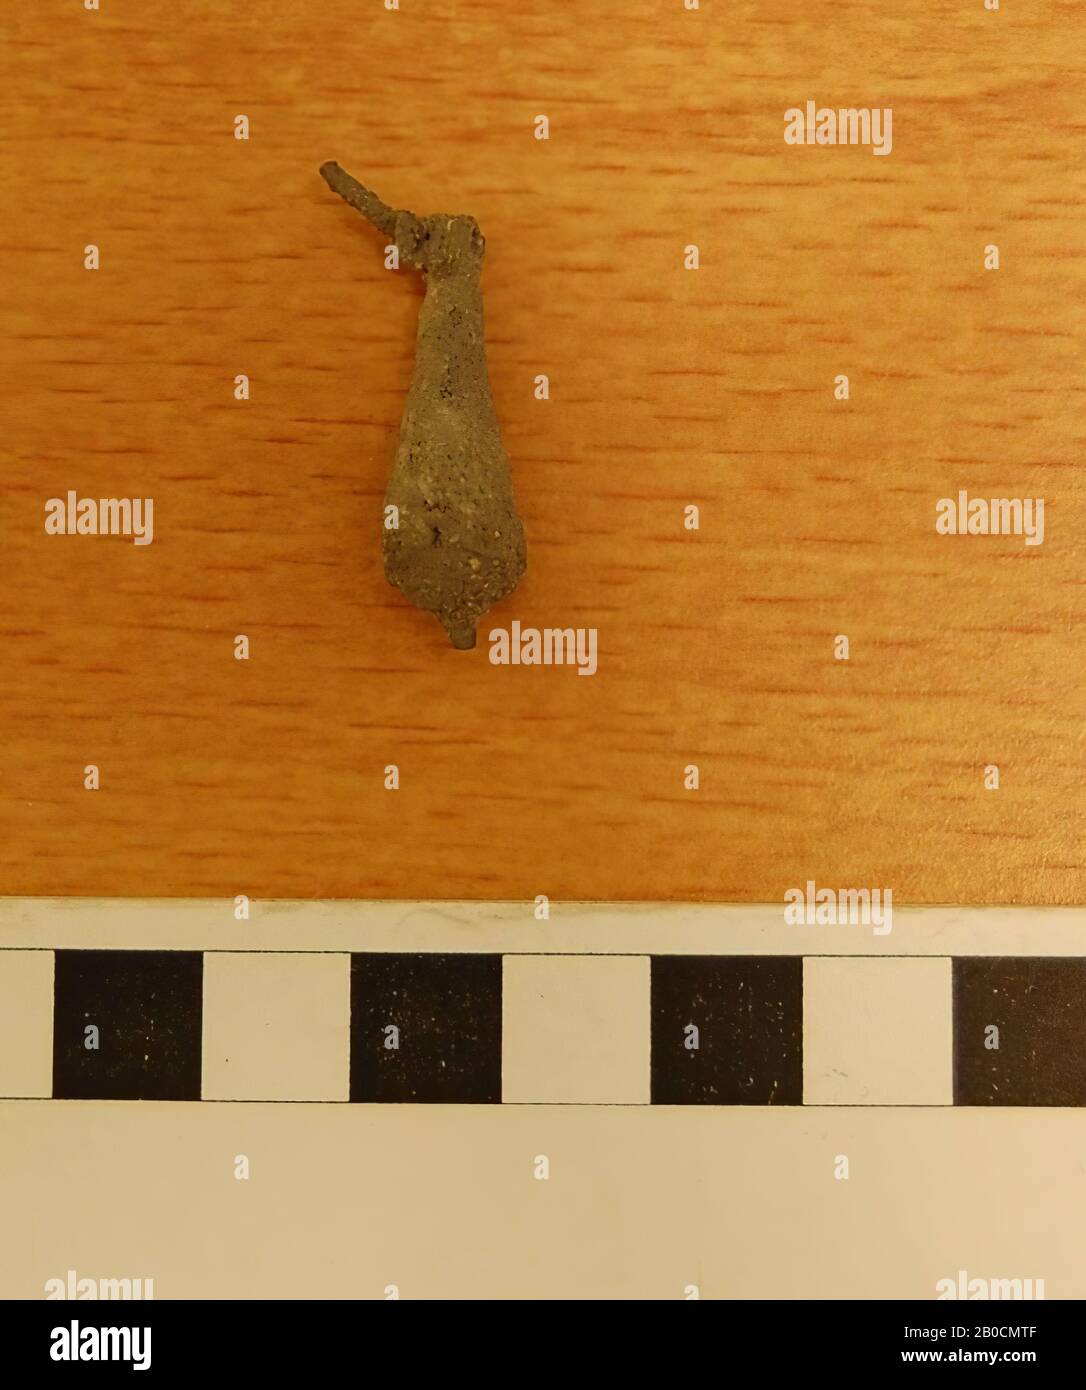 Drop shaped pendant of bronze, fragment of an earring ?, corroded, tomb inventory, ornament, bronze, D 0.1 cm, H 3 cm, Islamic Period 1250-1600 AD, Jordan Stock Photo